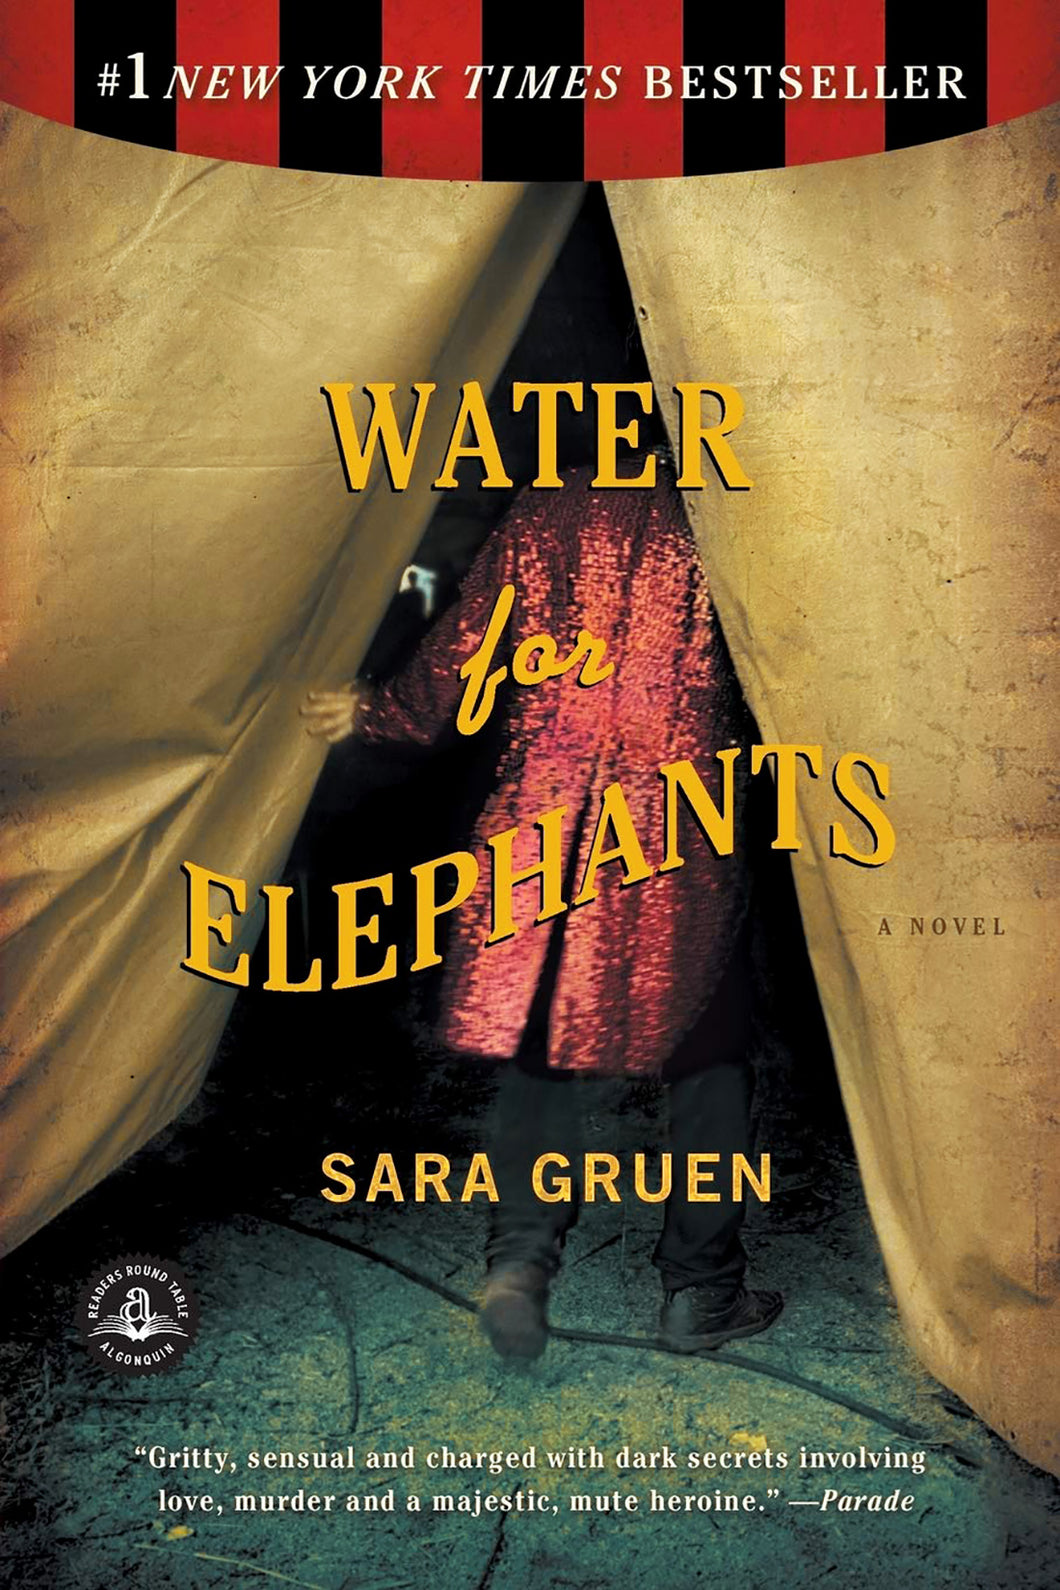 Water for Elephants by Sara Gruen / Paperback - NEW BOOK OR BOOK BOX